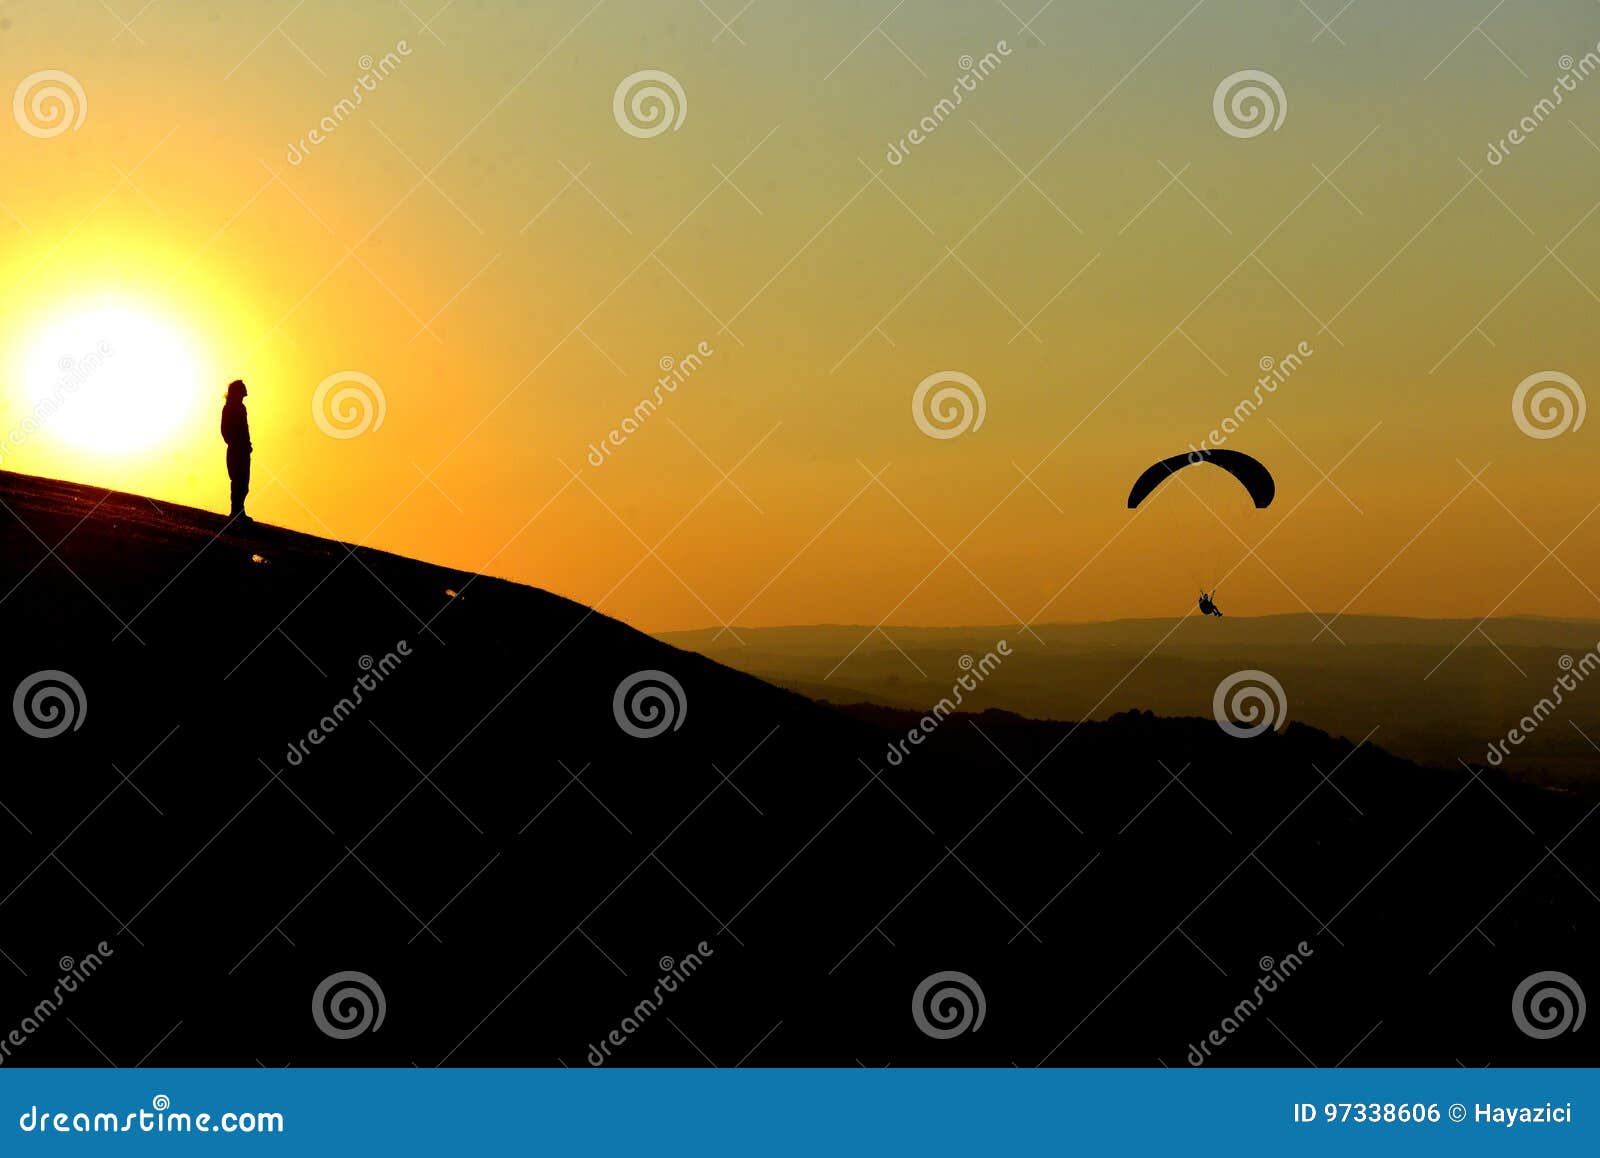 sunset and paragliding